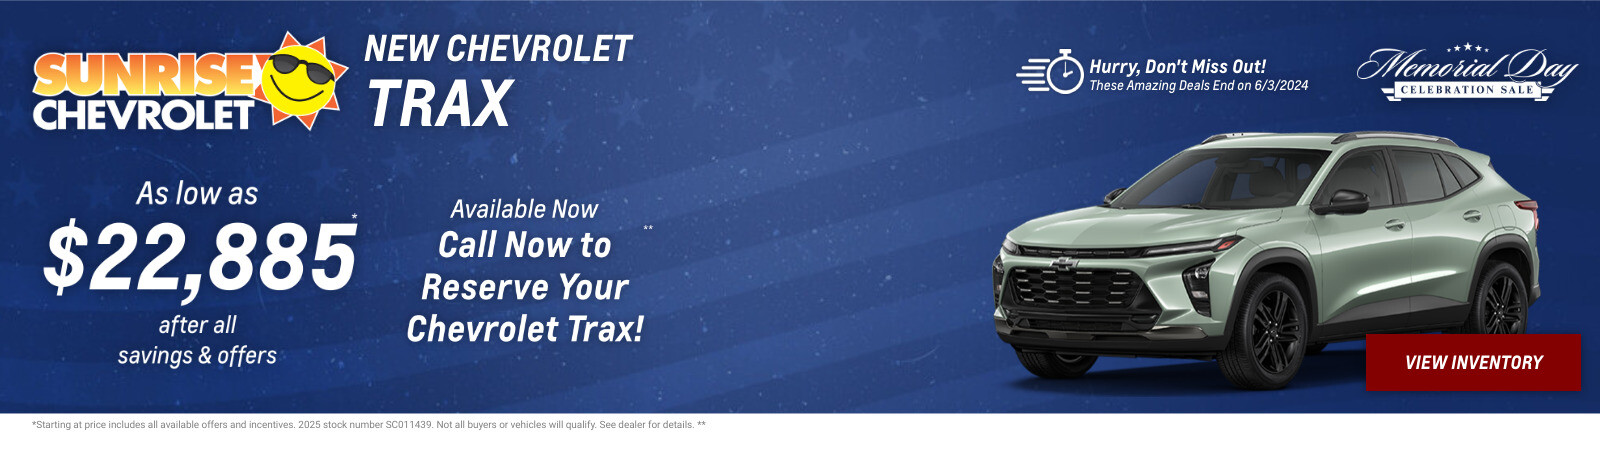 New Chevrolet Trax Current Deals and Offers in Chicago, IL